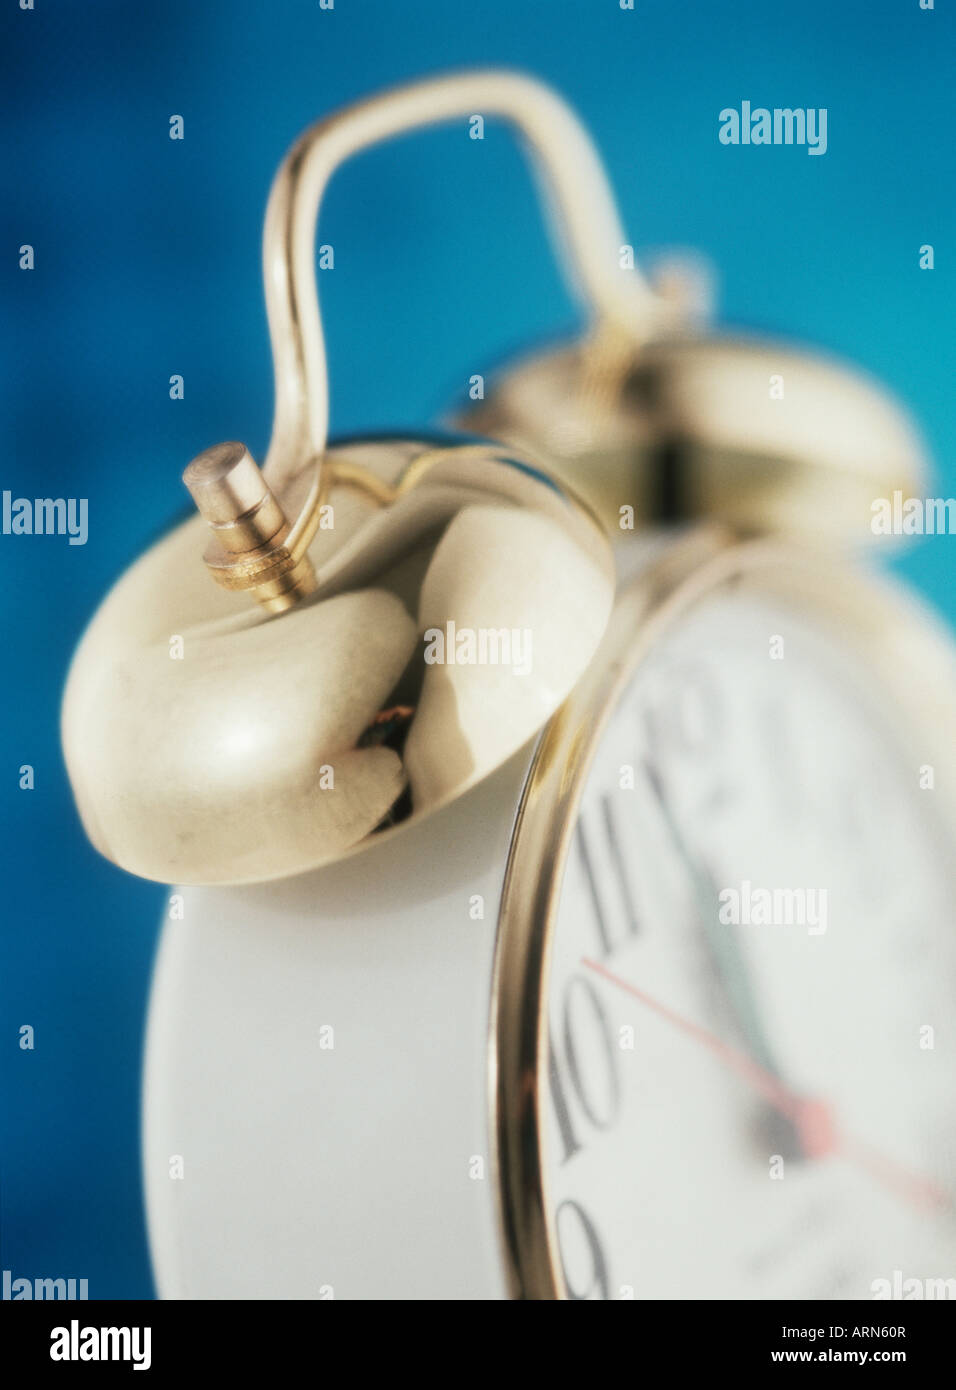 Alarm clock with old fashioned ring bells - soft focus, Canada. Stock Photo